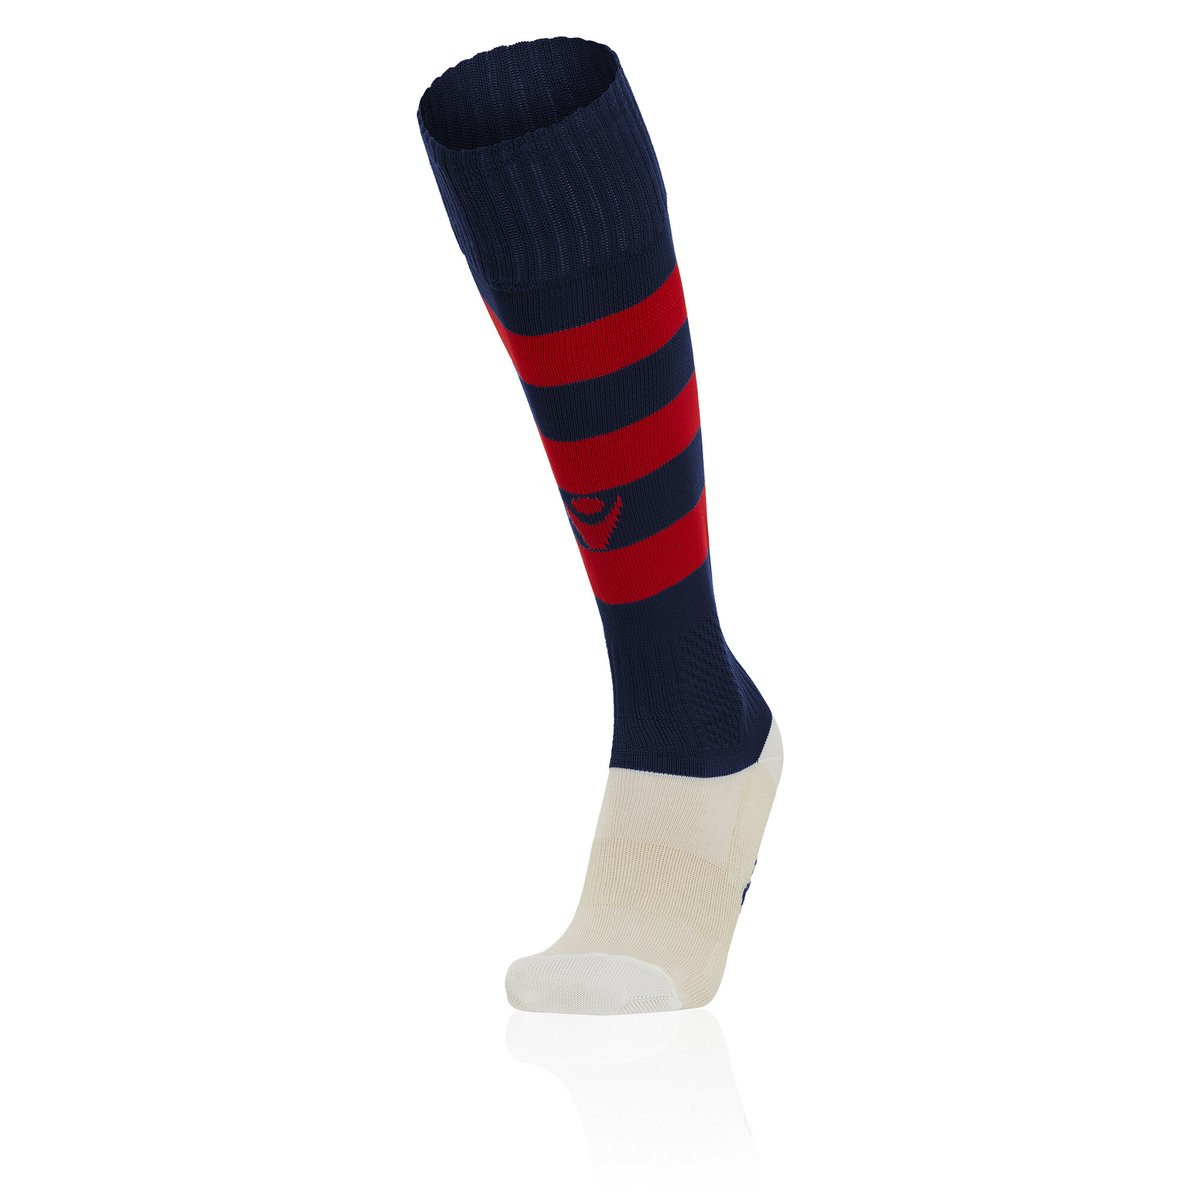 Macron Hoops Match Sock - Navy/Red (Pack of 5)